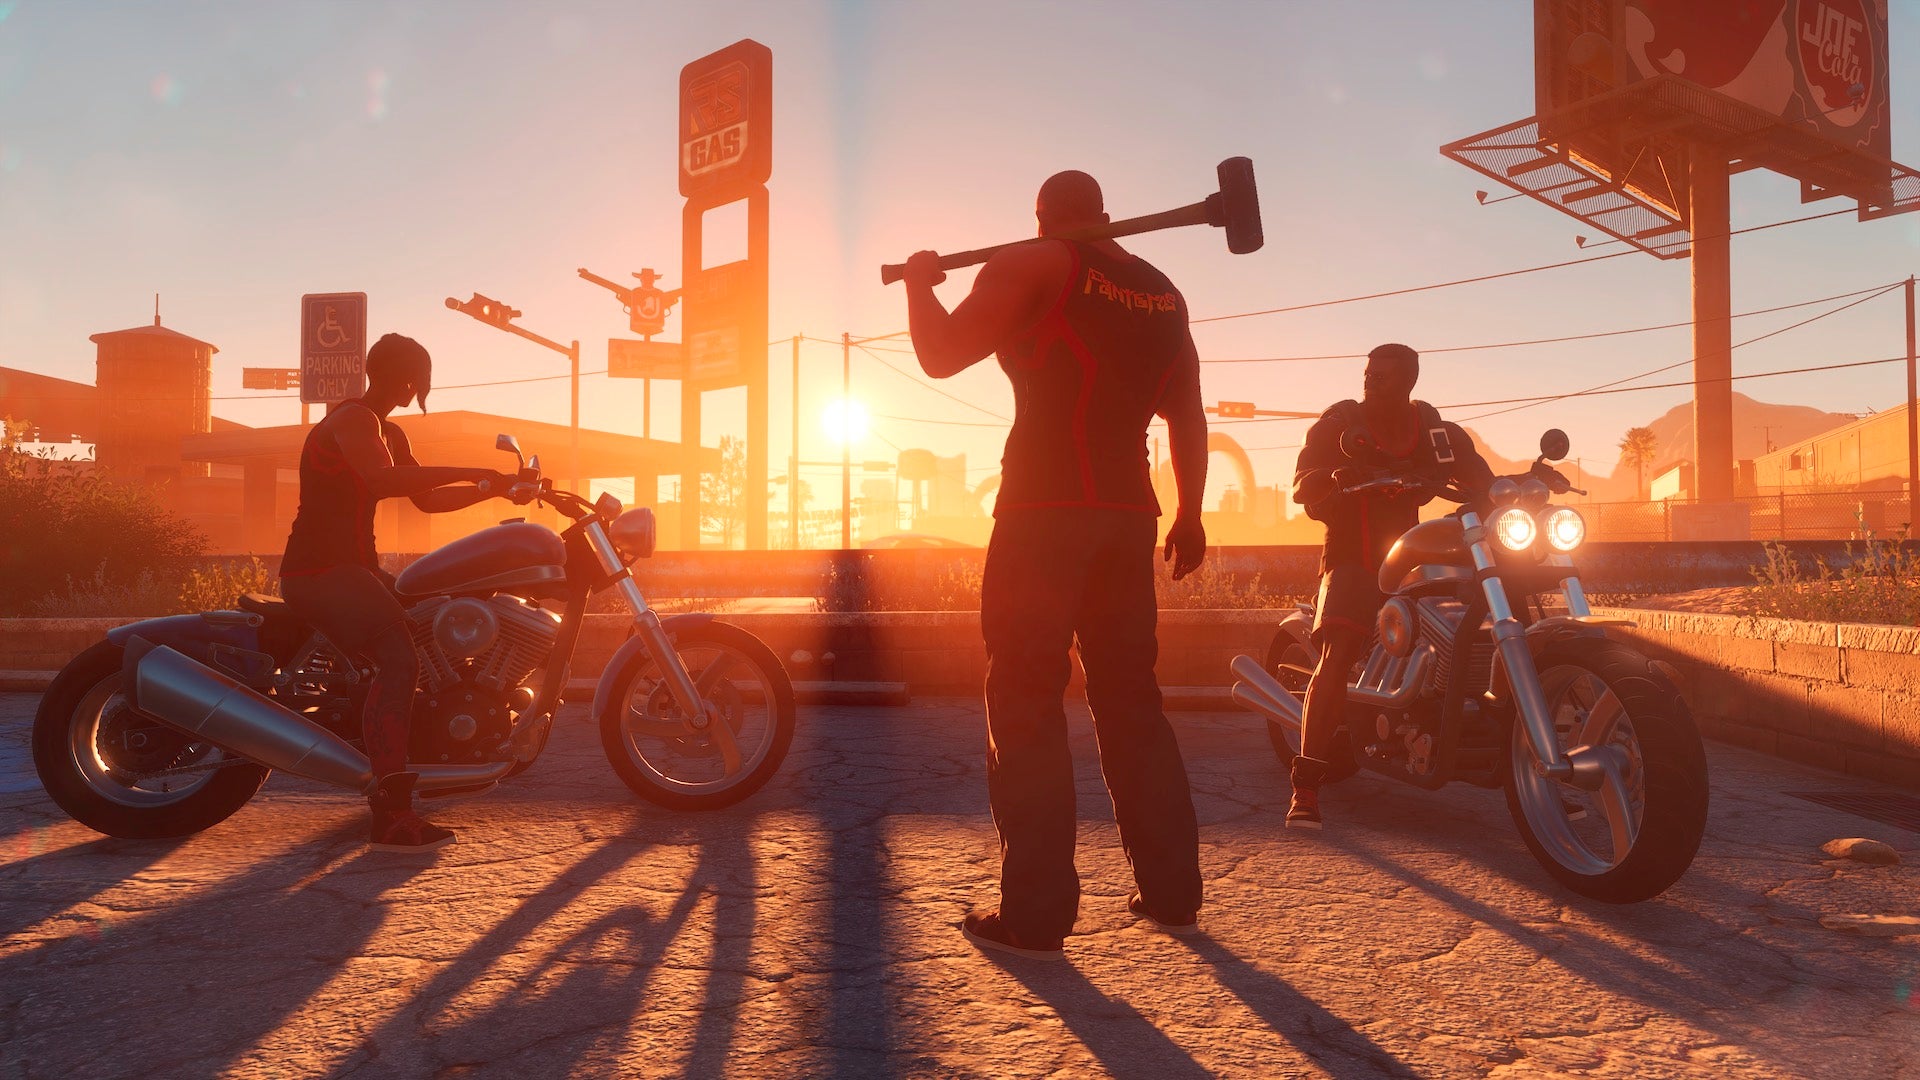 Three members of the Panteros gang hangout as the sun sets in Saints Row.